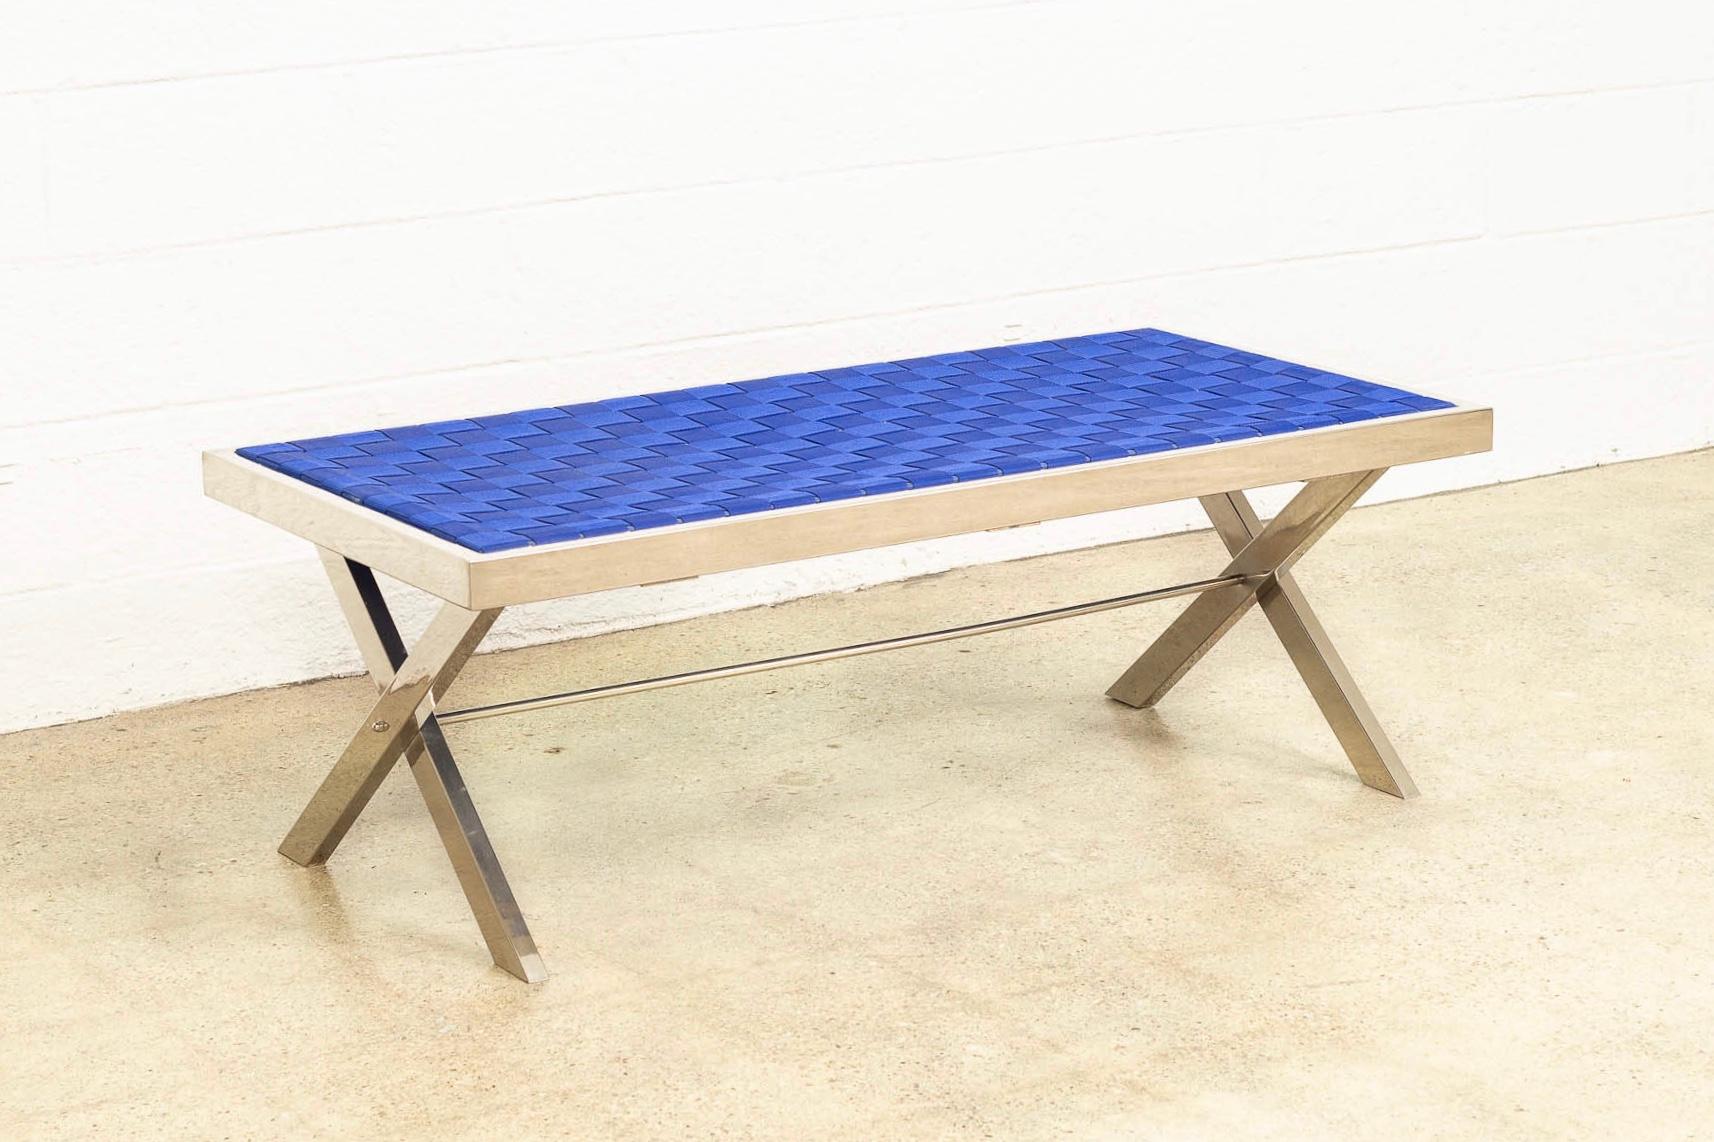 This vintage Mid-Century Modern Milo Baughman style chrome and strap bench is circa 1980. The clean, Minimalist design features a chrome frame with crossed X-base and a woven heavy strap seat in a striking shade of royal blue. Use as a seat bench or